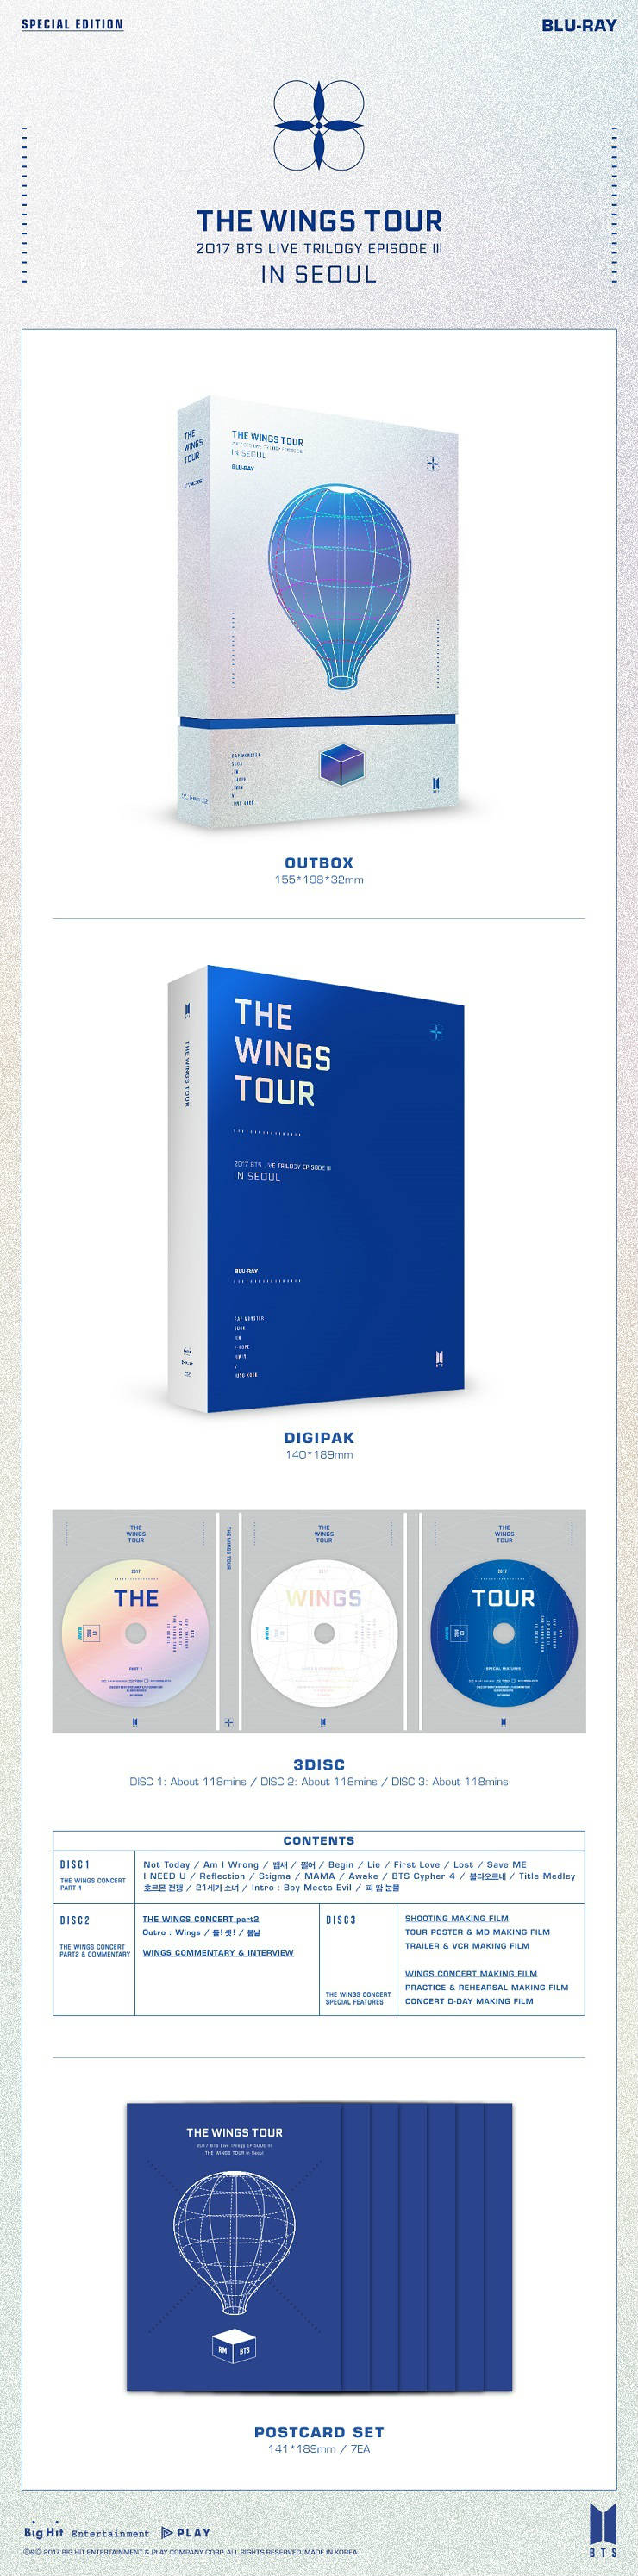 BTS THE WINGS TOUR 2017 in SEOUL Blu-rayTheWingsTour